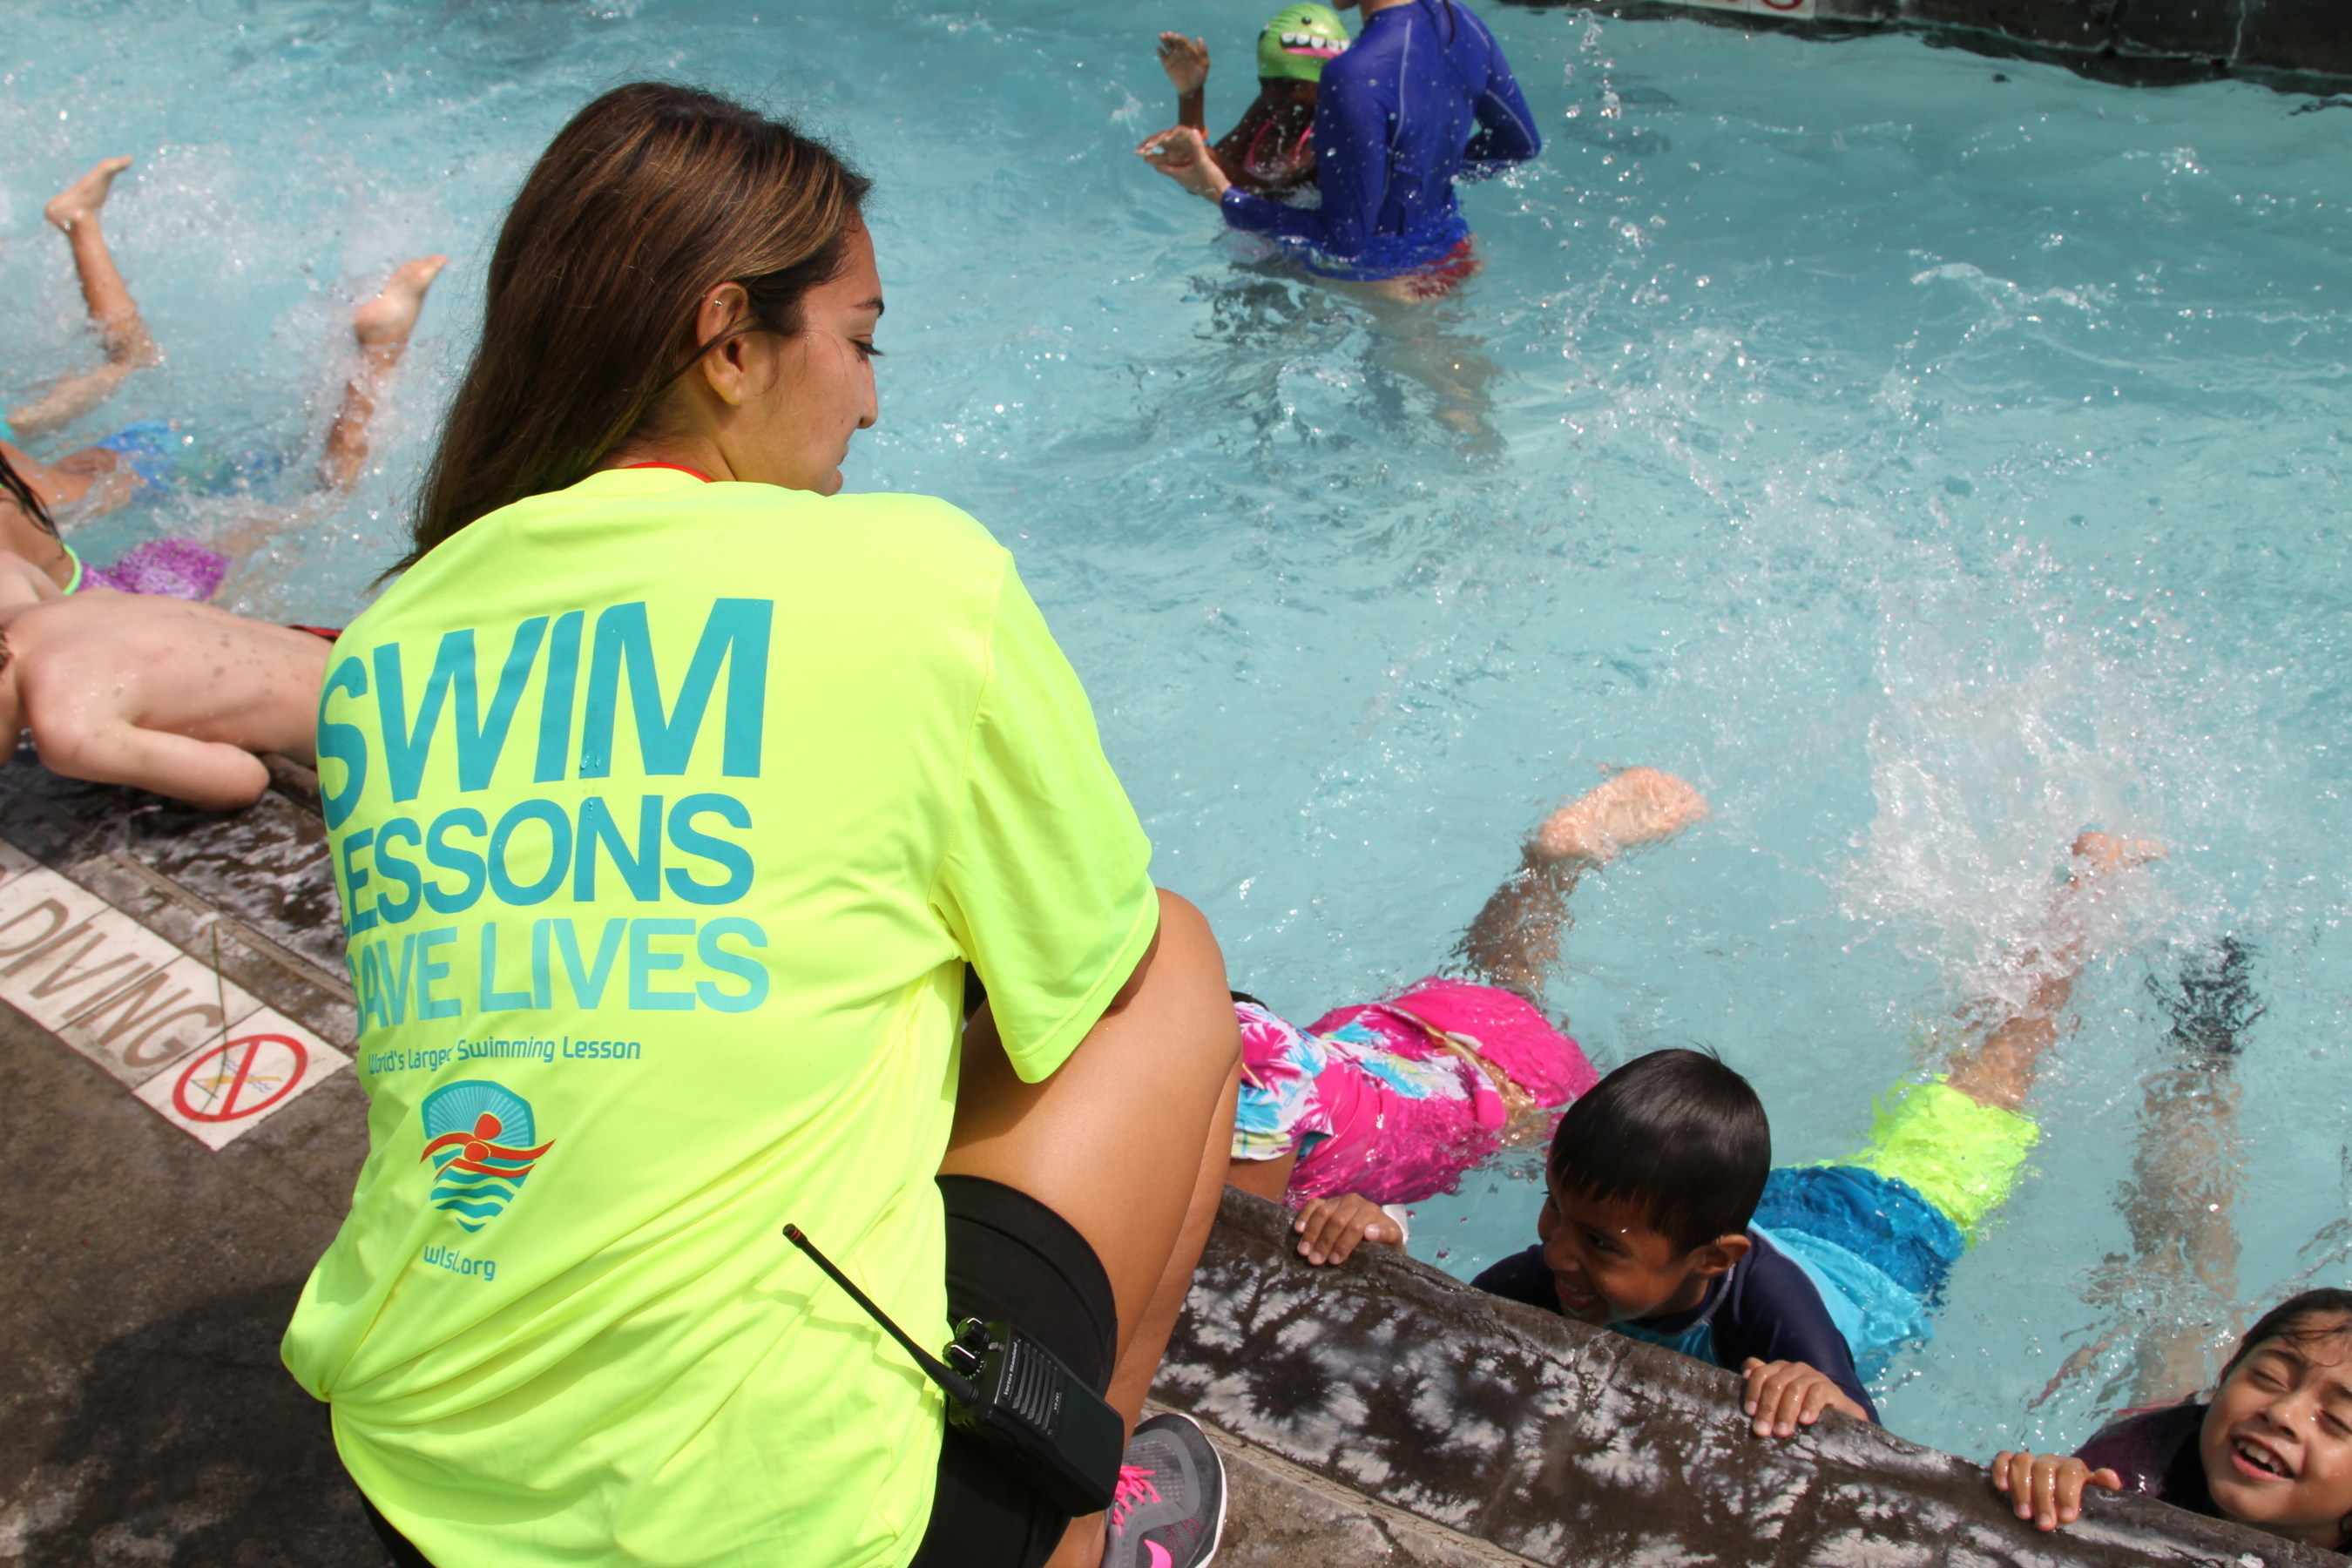 Supervising Lifeguard, Nicole Alvarado instructs swimmers during The 2016 World's Largest Swimming Lesson at Splash La Mirada outside of Los Angeles. More than 45,000 swimmers in 24 countries joined forces to help send the message Swimming Lessons Save Lives to help prevent drowning, the second leading cause of accidental death for kids ages 1-14. More drowning and near-drowning accidents take place in June than any other month of the year.